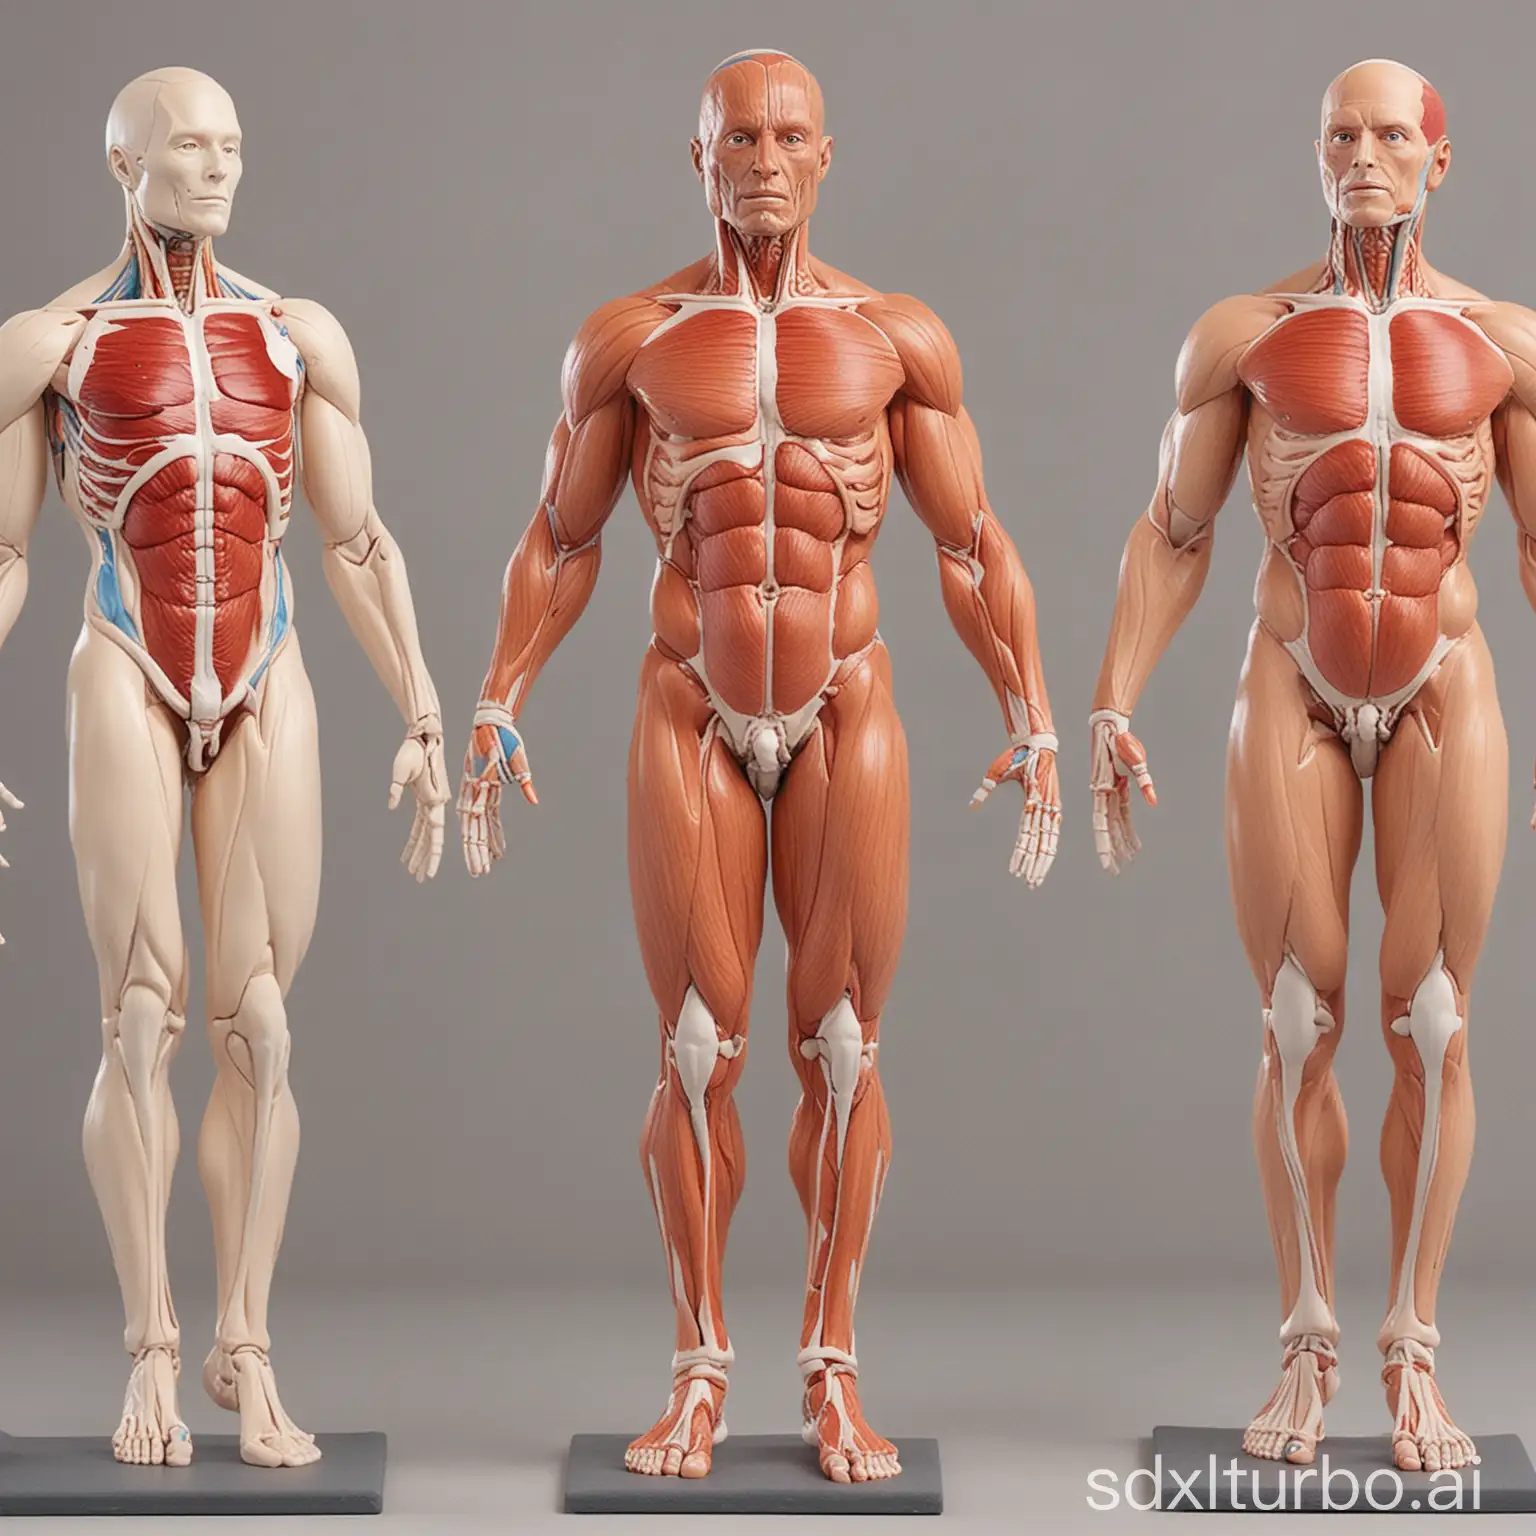 Anatomy-Class-Human-Body-Model-Learning-in-a-Classroom-Setting